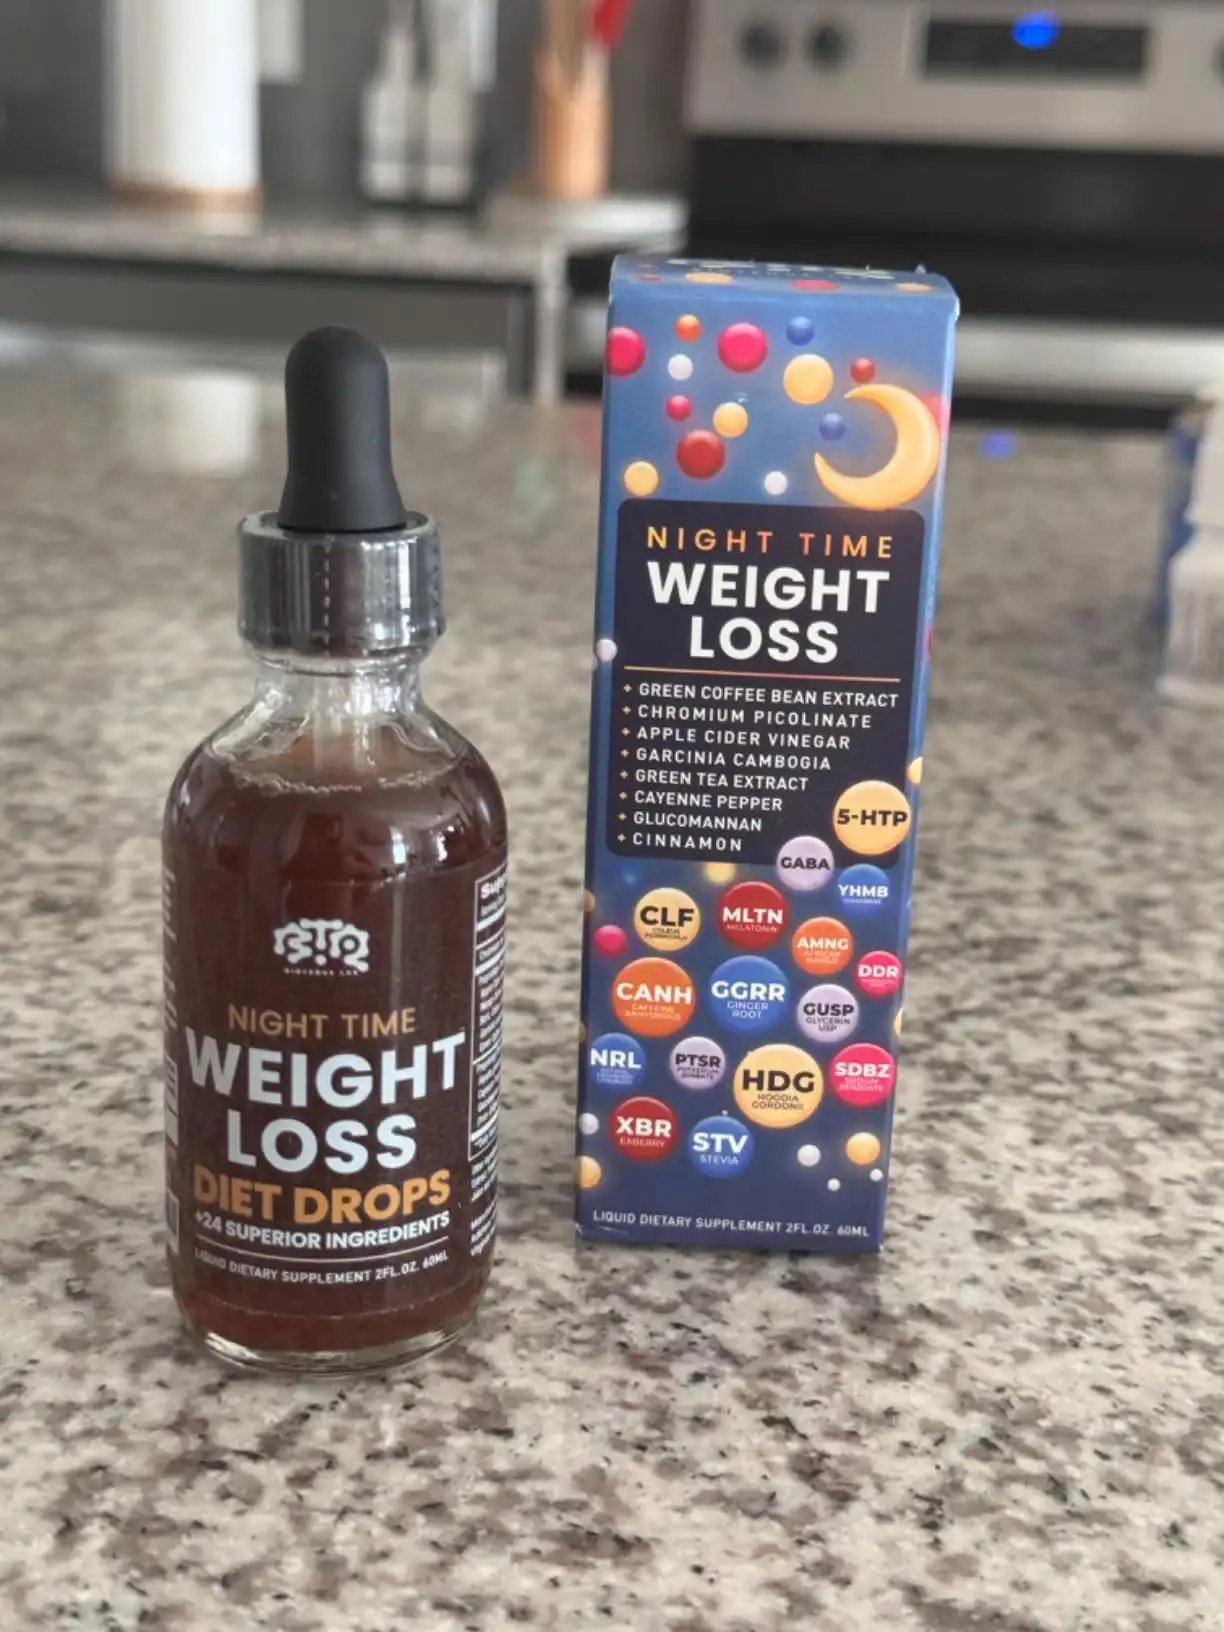 BIOTEQUELAB Night Time Weight Loss Diet Drops Review